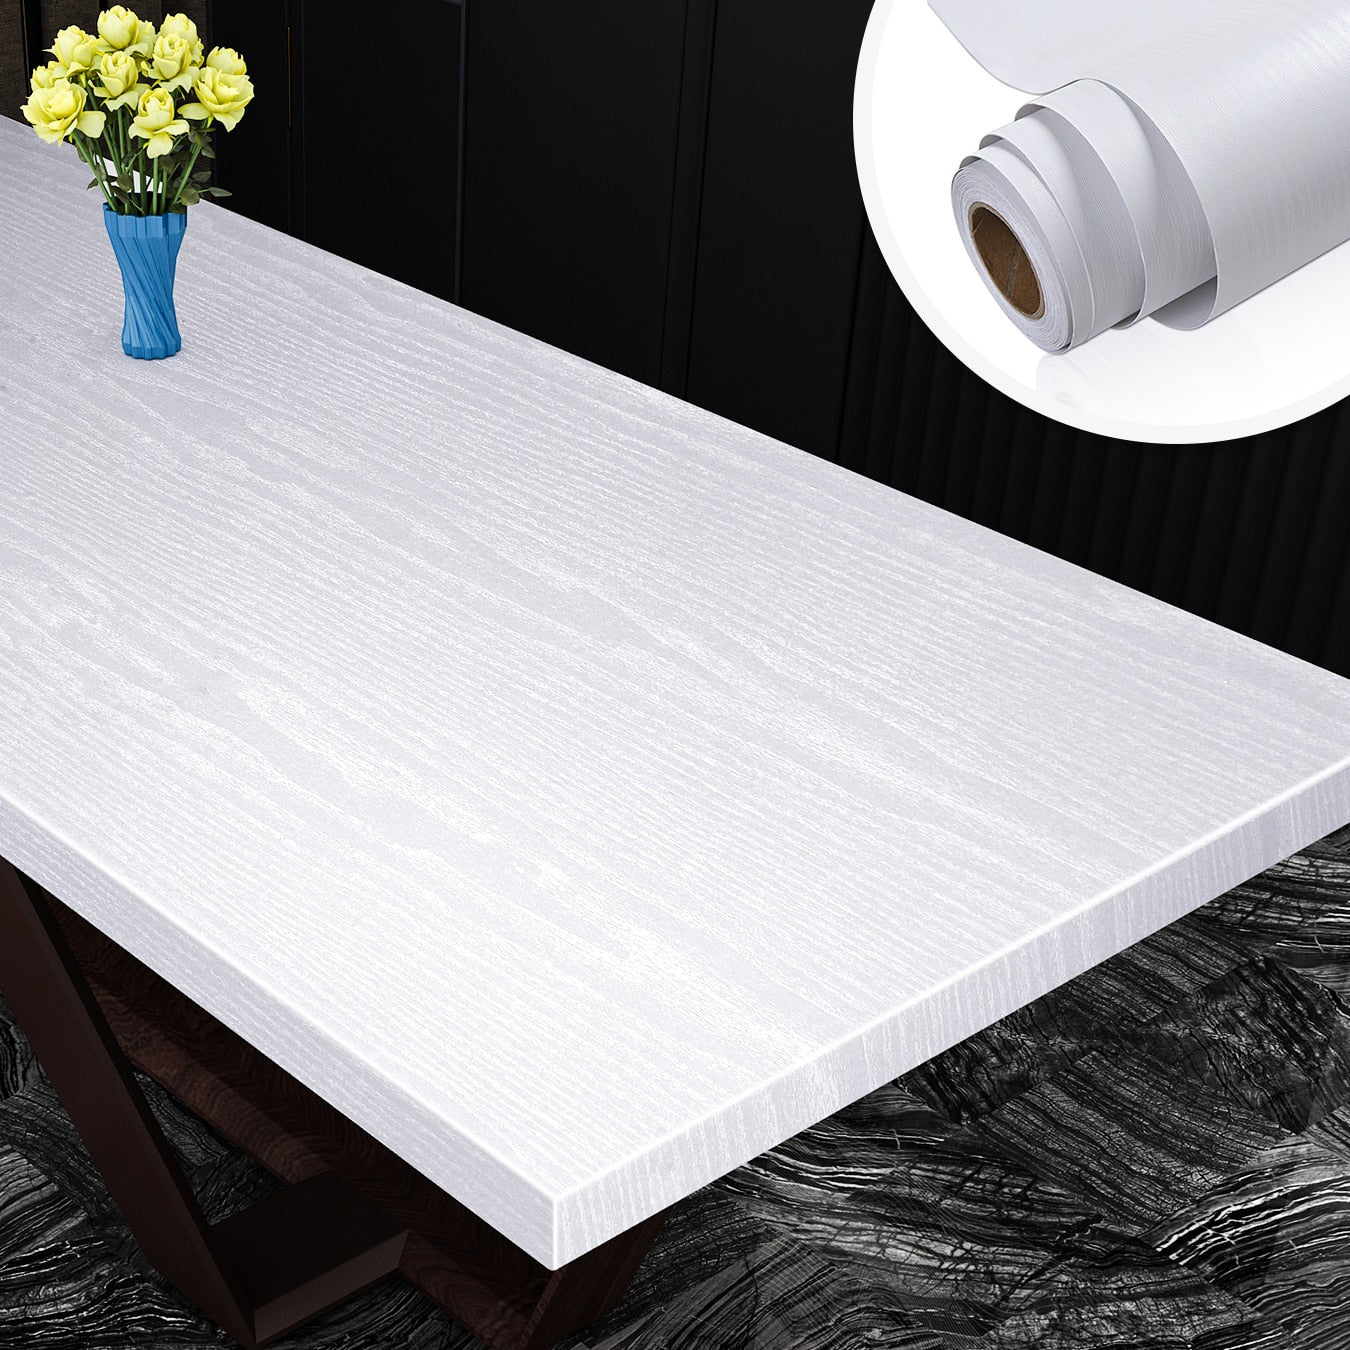 Wallpaper Black Thicken Contact Paper Wood Peel and Stick